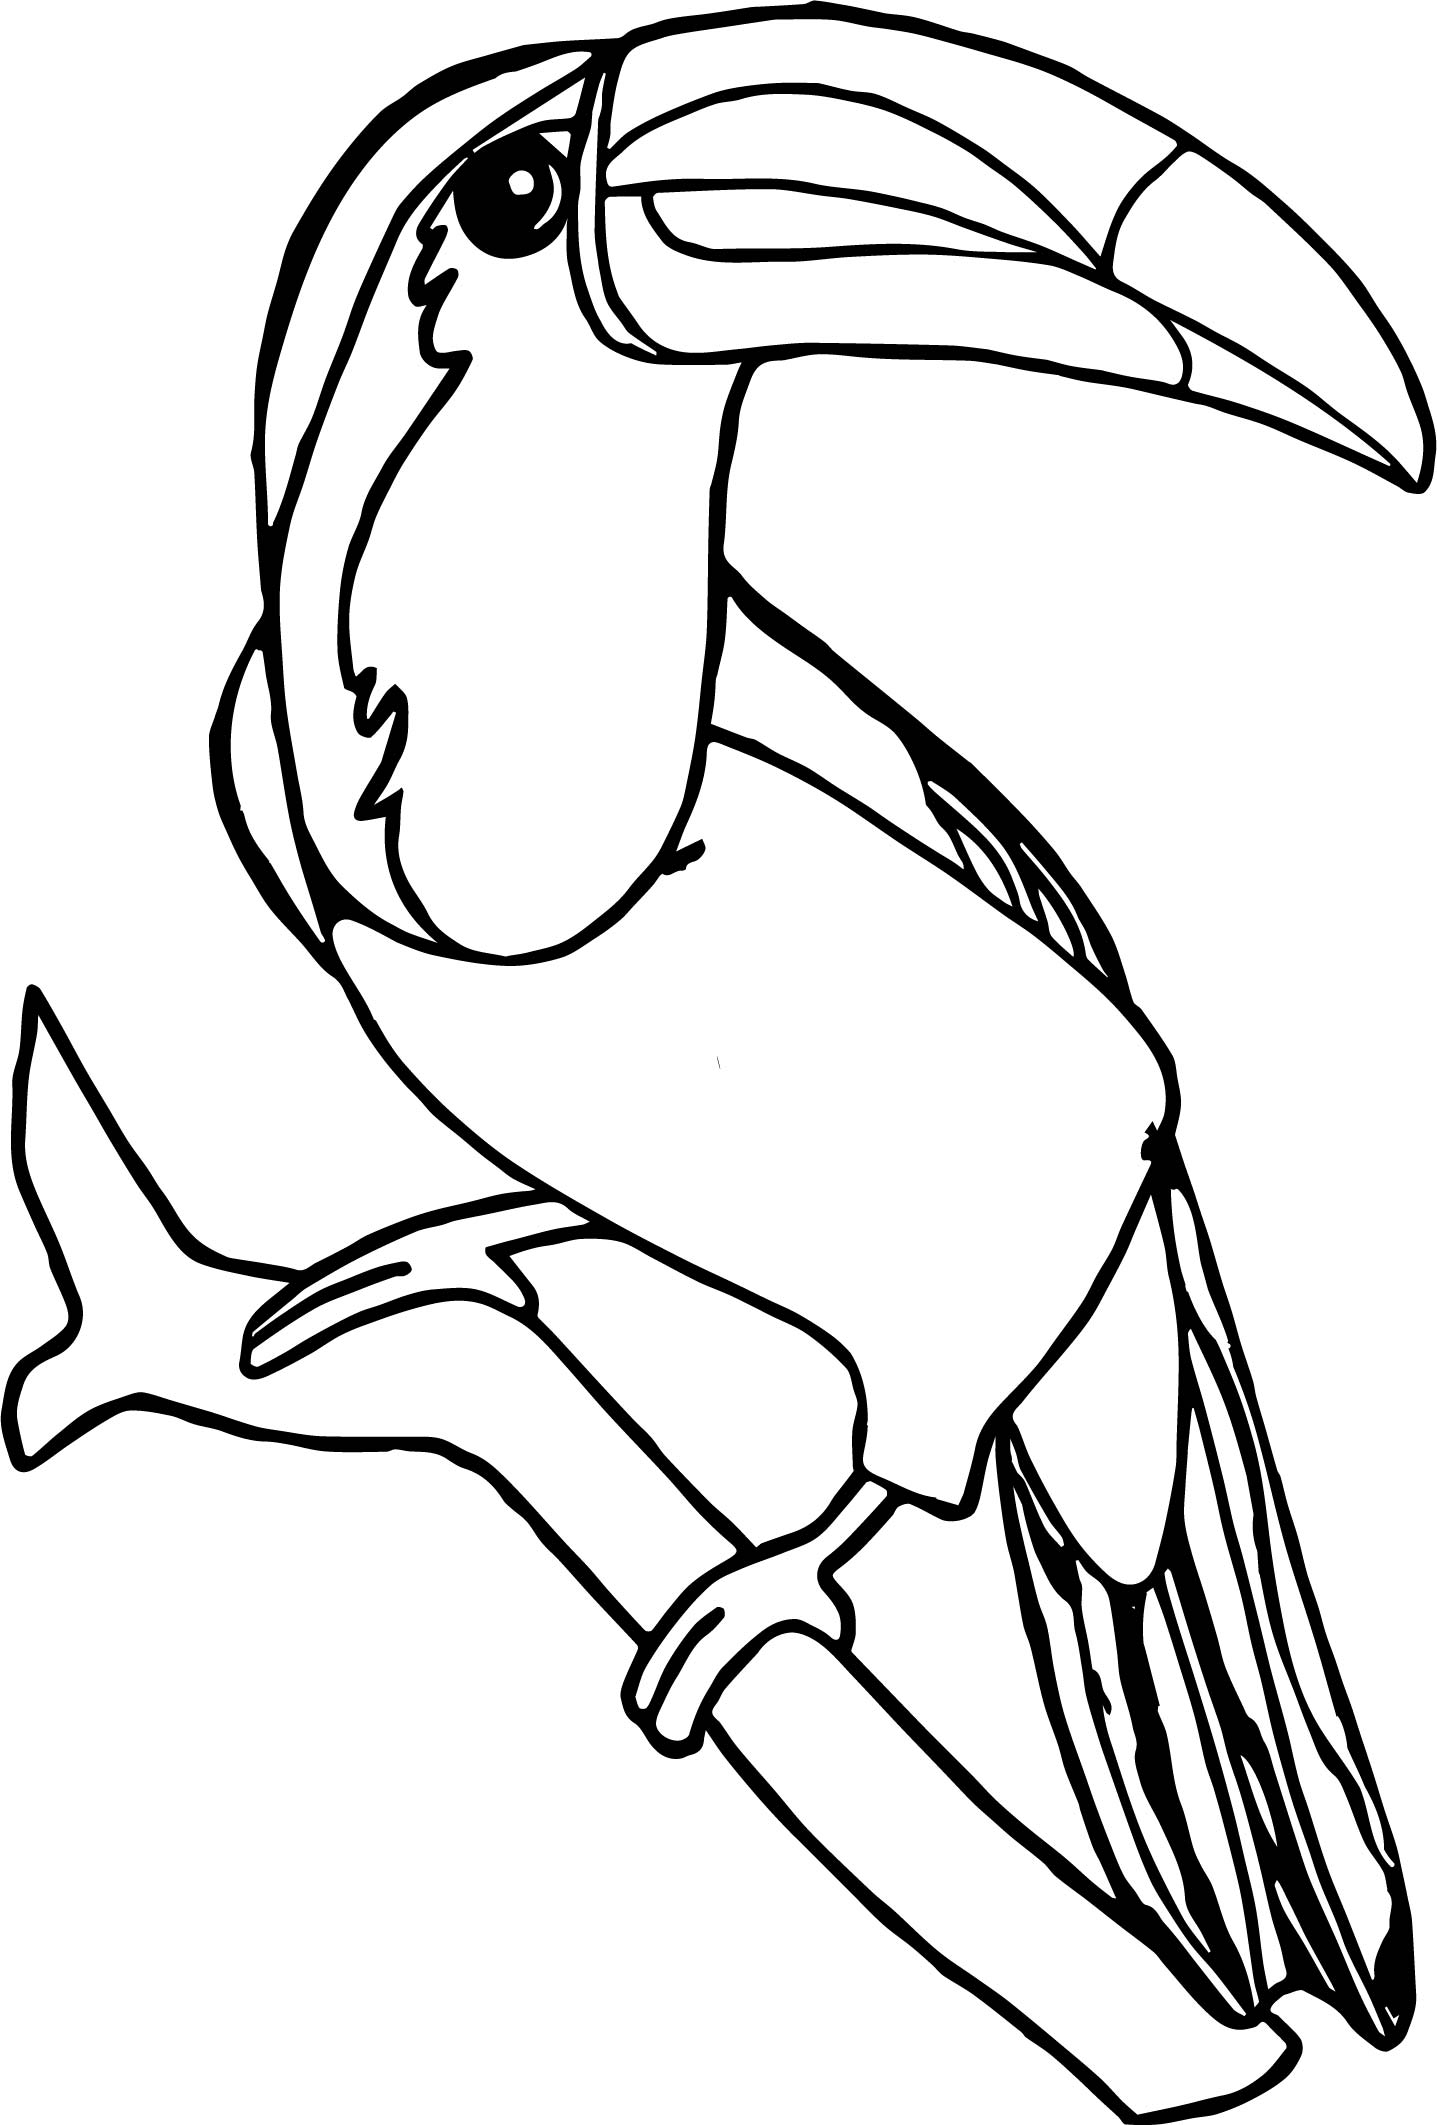 Toucan Bird Coloring Pages at GetColorings.com | Free printable